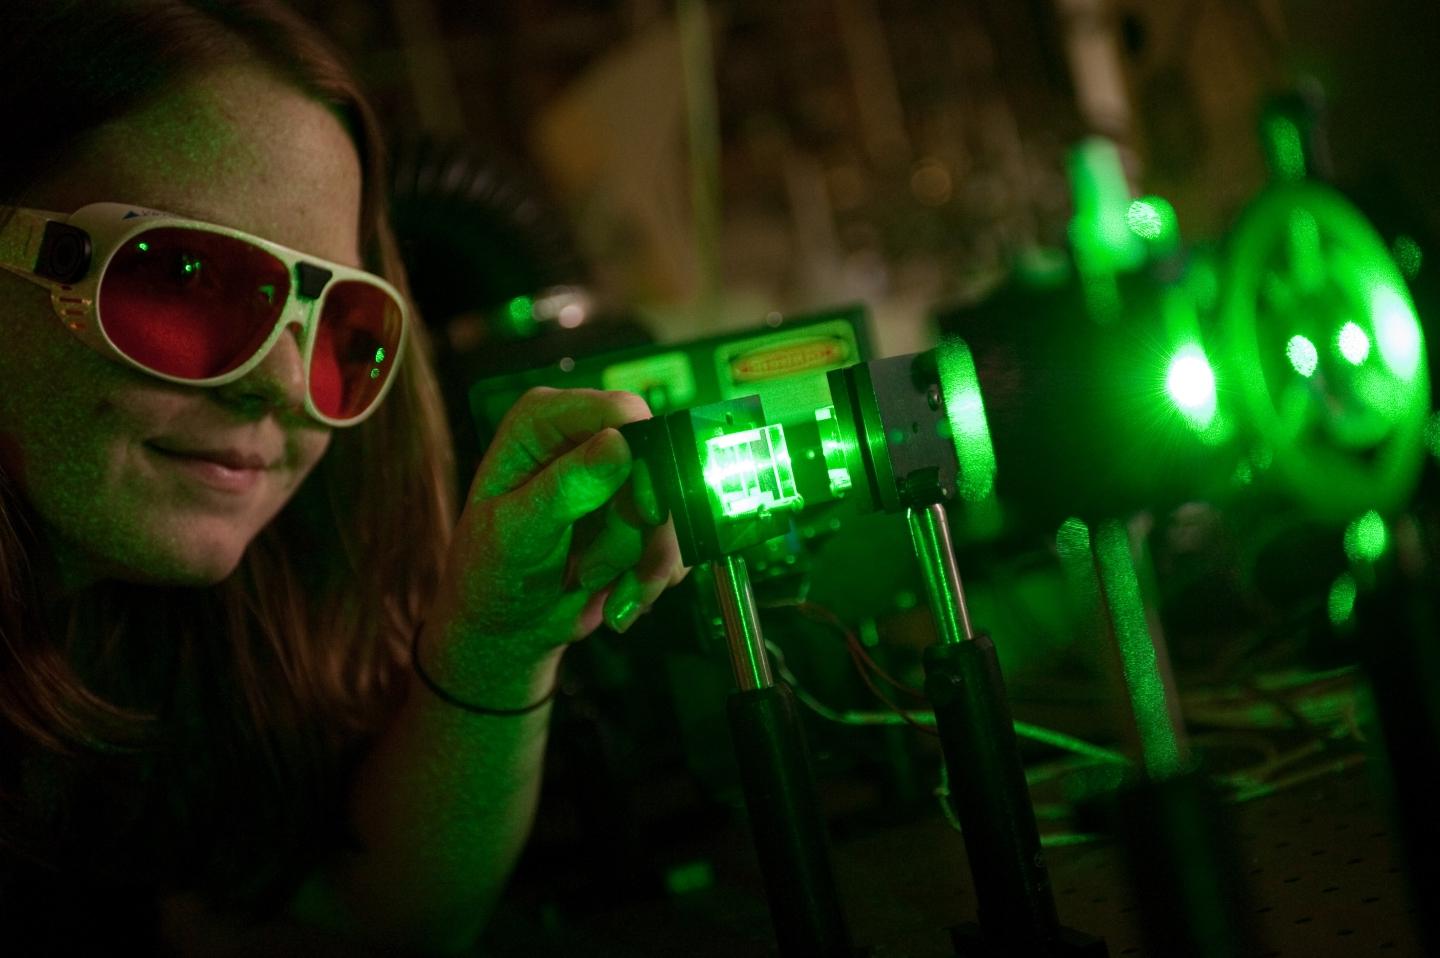 Student shining green lasers on mirrors